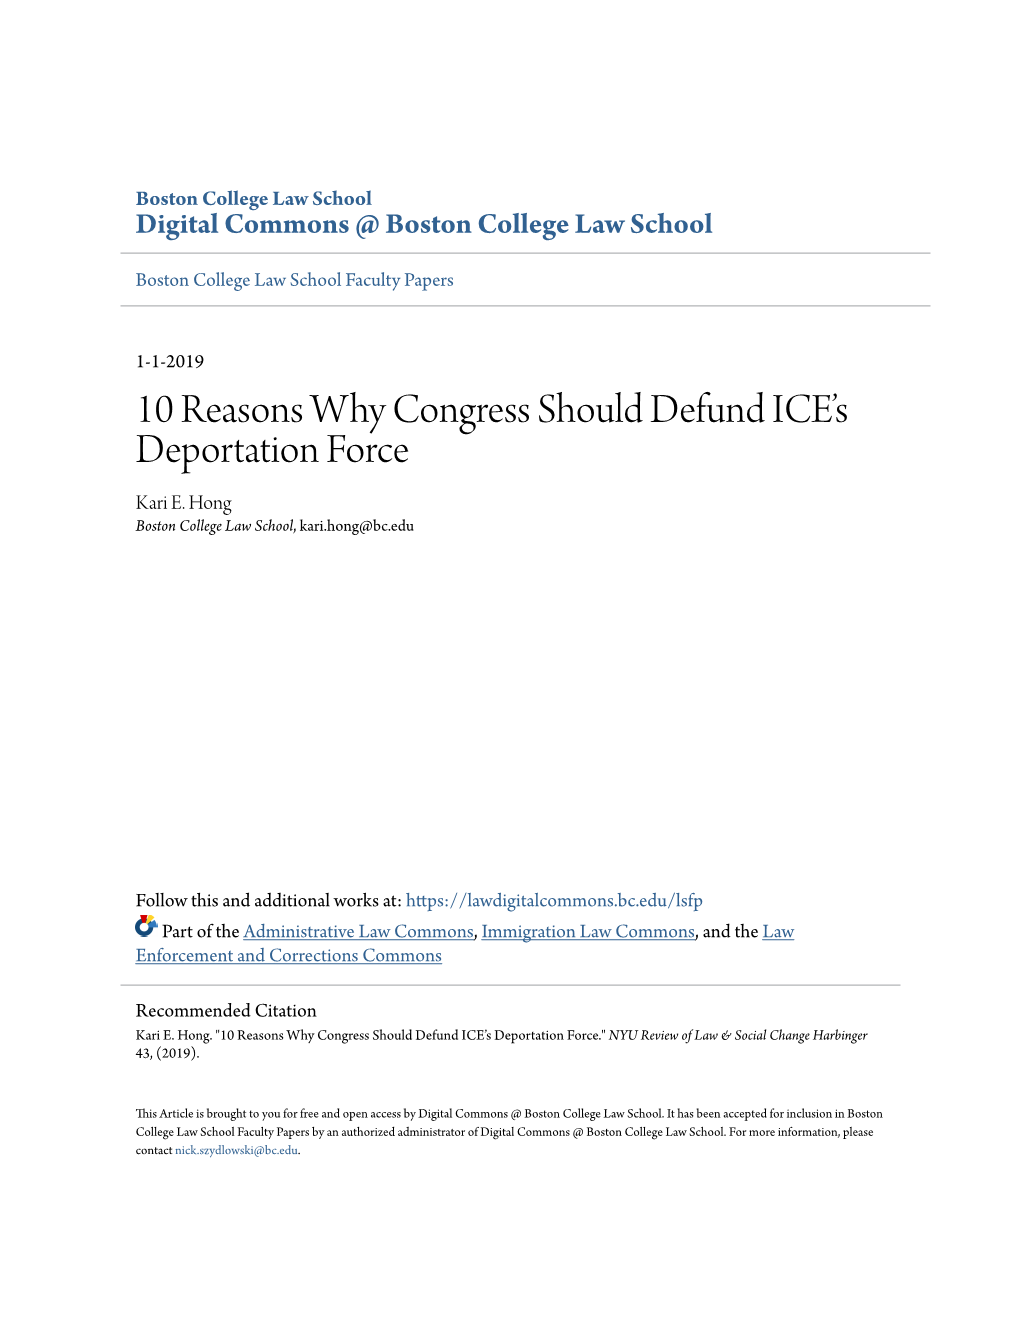 10 Reasons Why Congress Should Defund ICE's Deportation Force